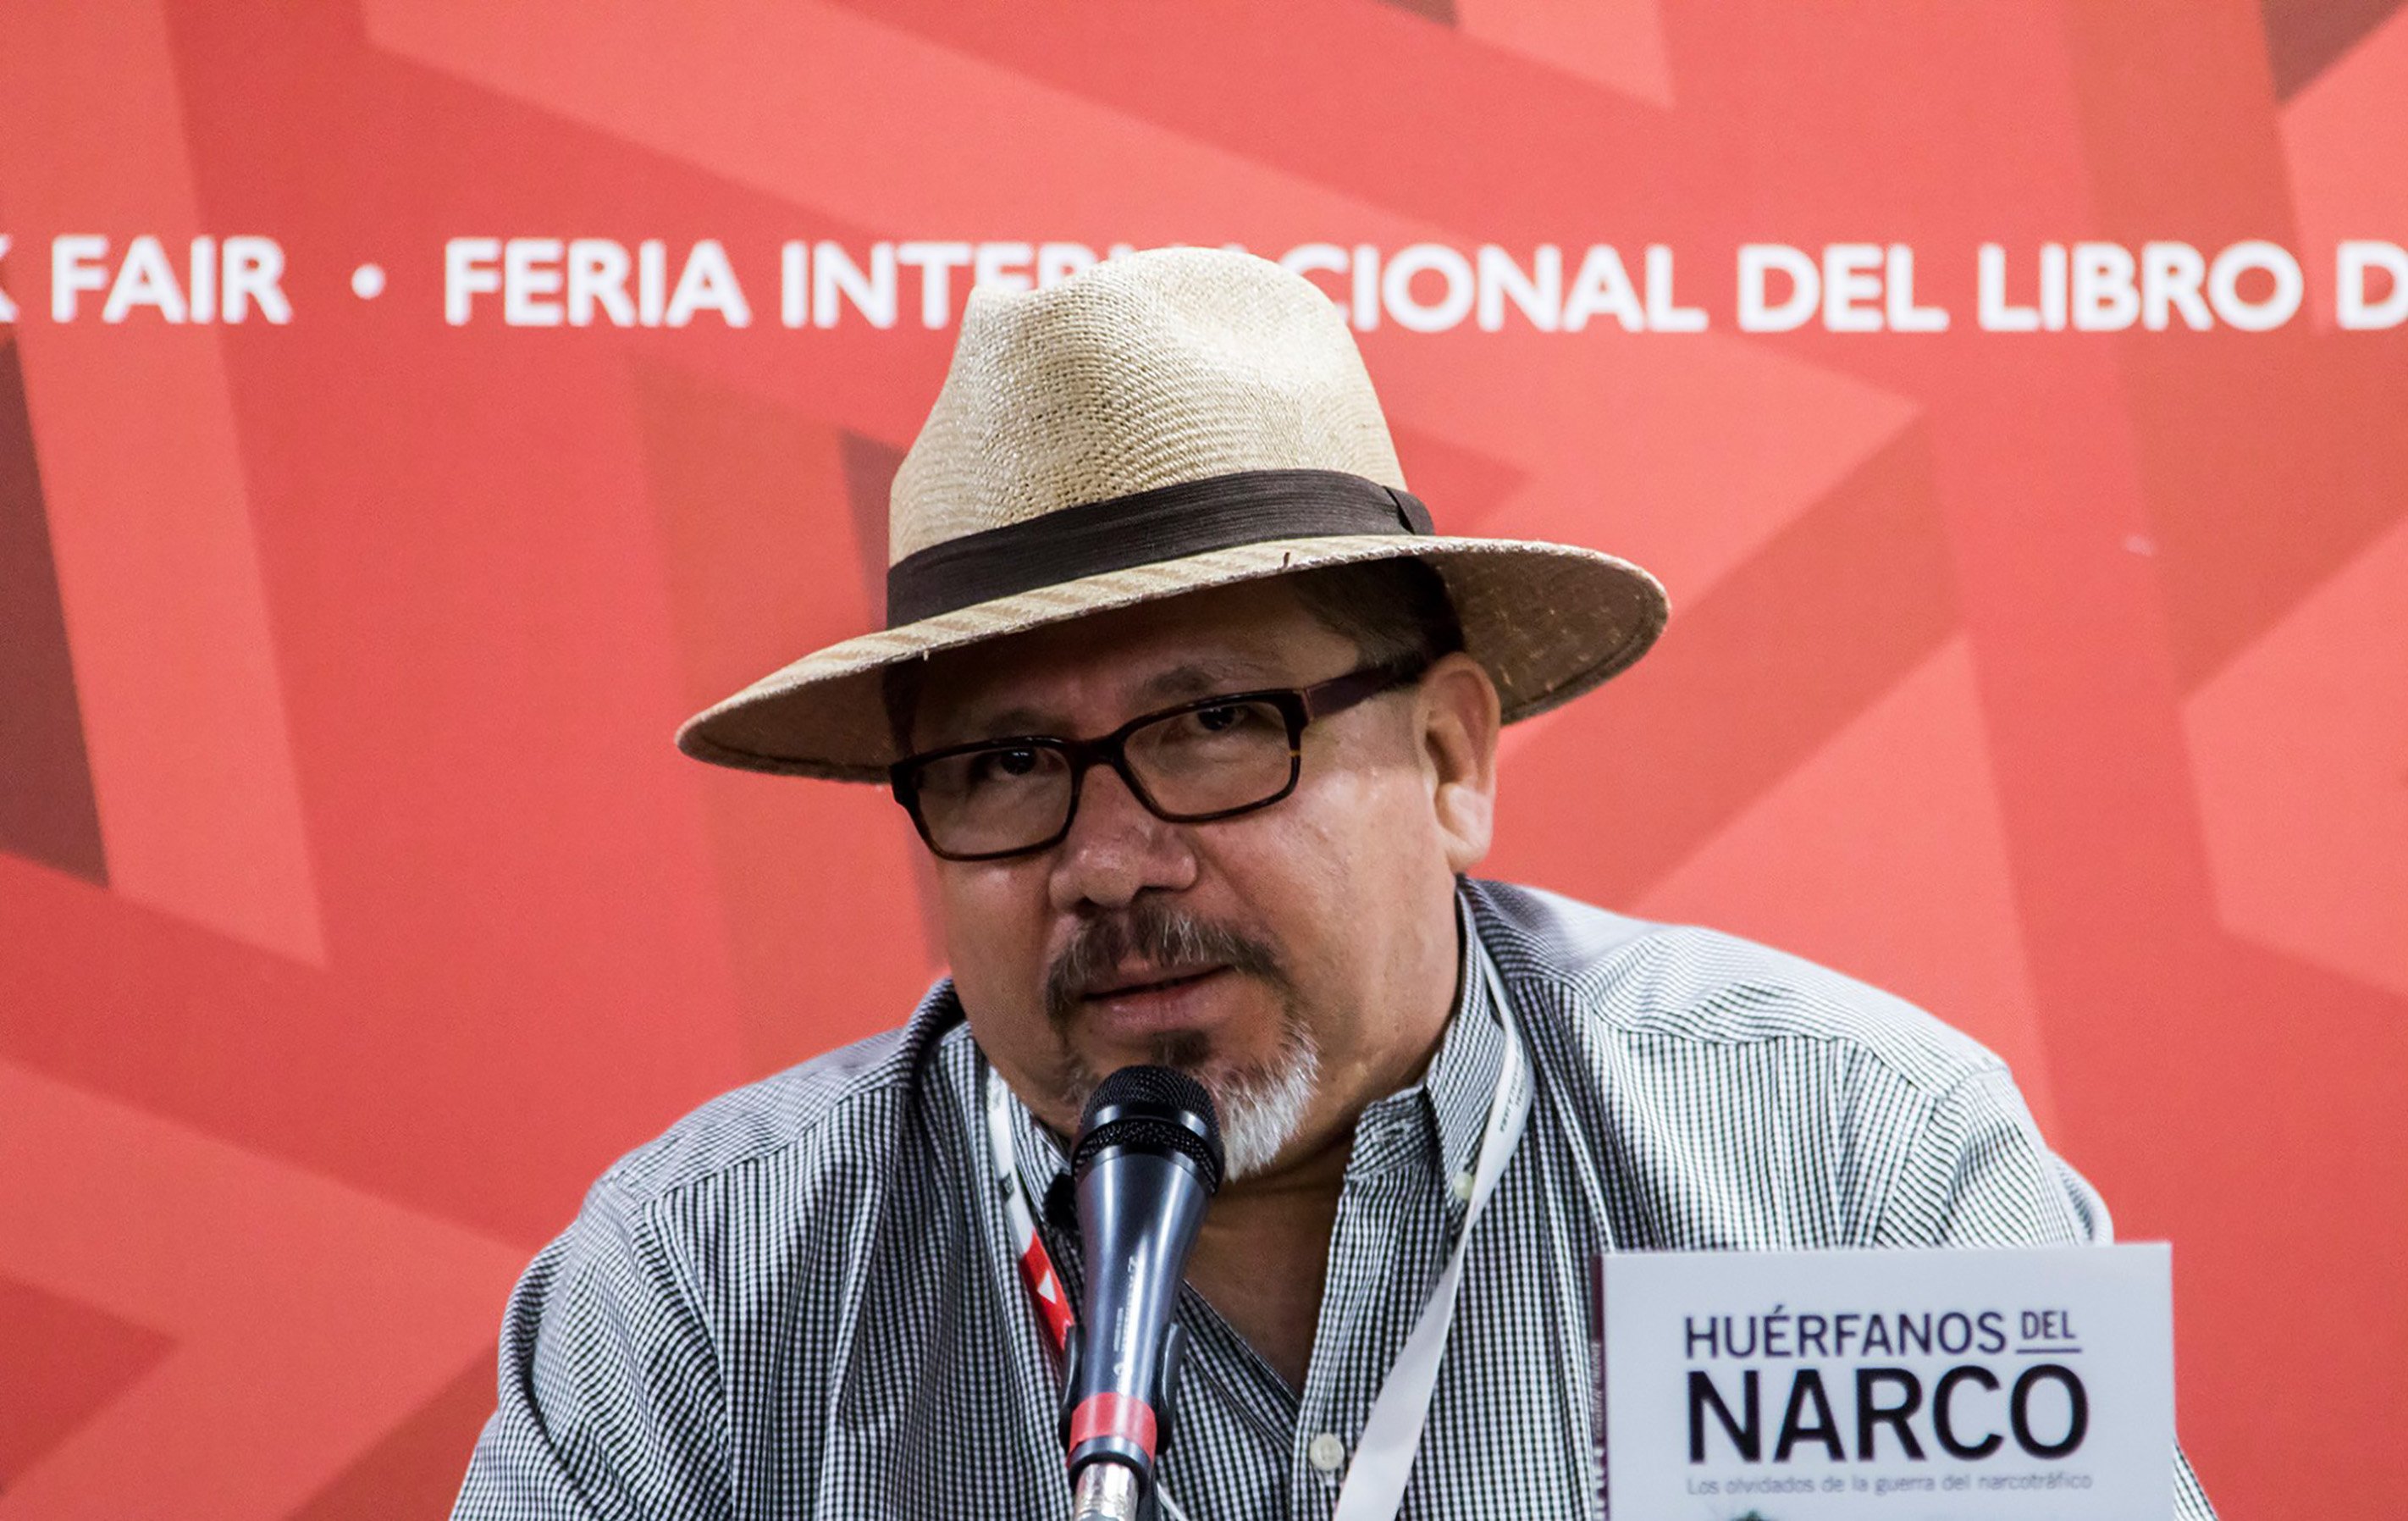 Mexican journalist Javier Valdez speaking during the presentation of his book "Huerfanos del Narco" in the framework of the International Book Fair in Guadalajara, Mexico on Nov. 27, 2016. (Hector Guerrero—FP/Getty Images)